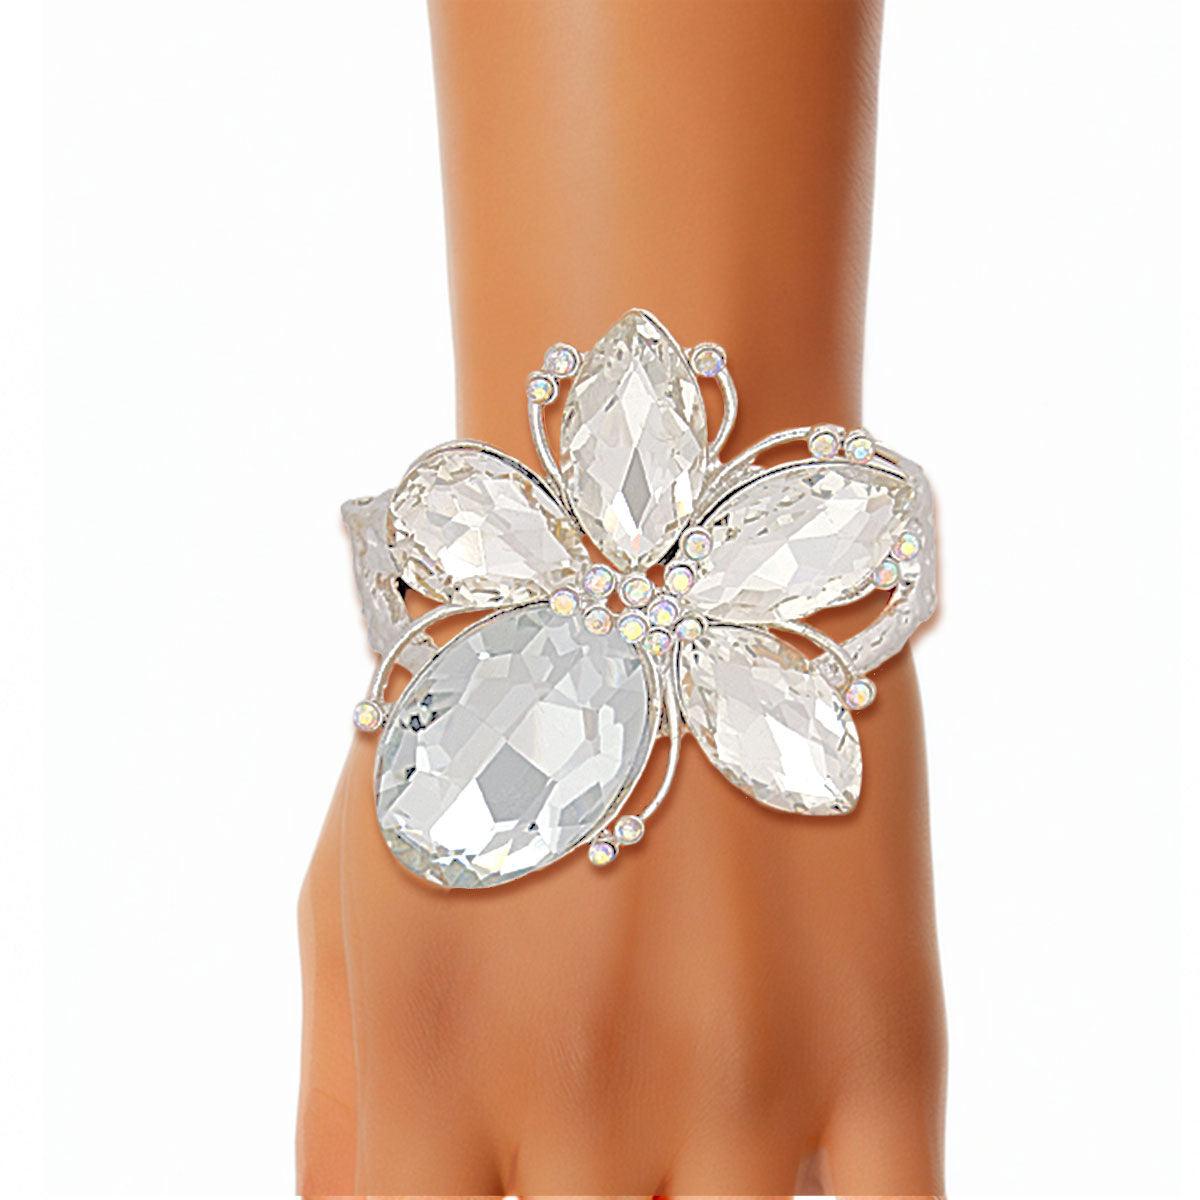 Transform Your Look with a Stunning Silver/Clear Flower Bracelet